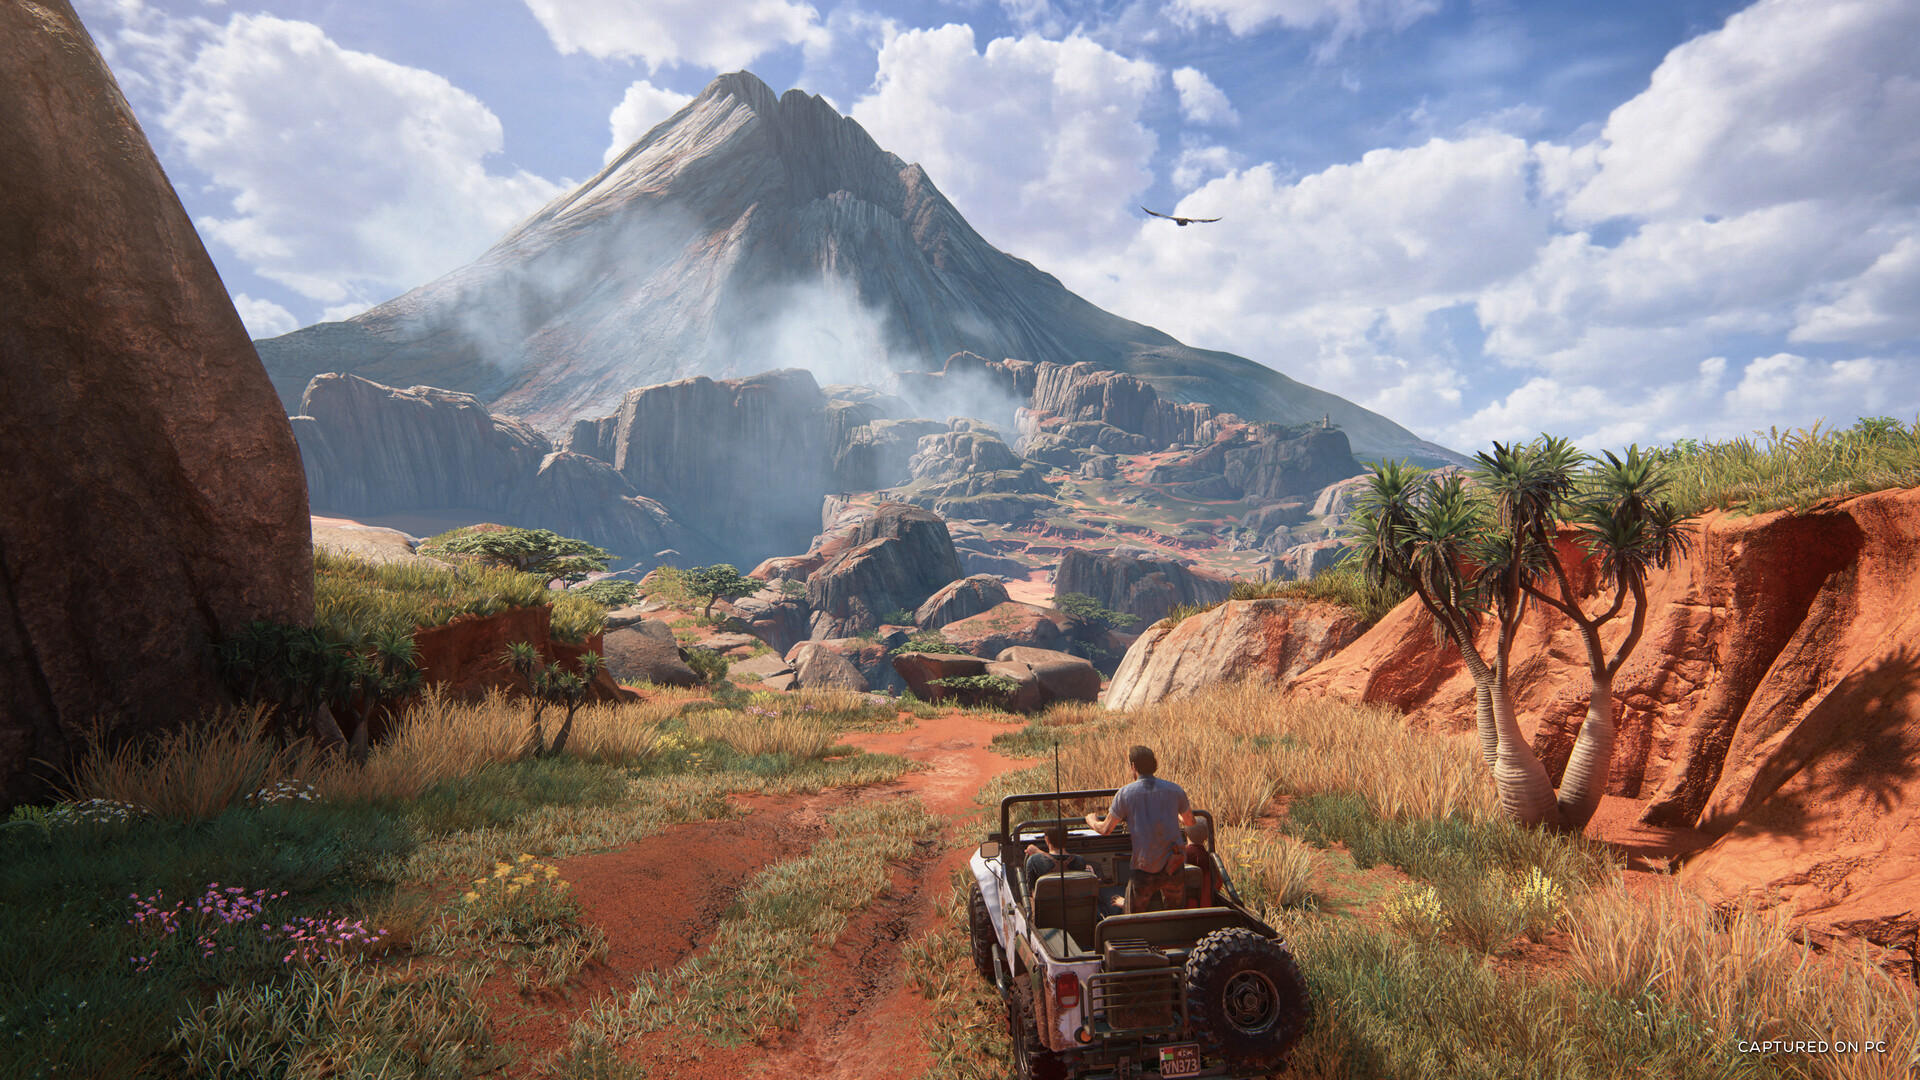 Uncharted PC Port Has Lowest Player Count of Any Sony Game at Launch